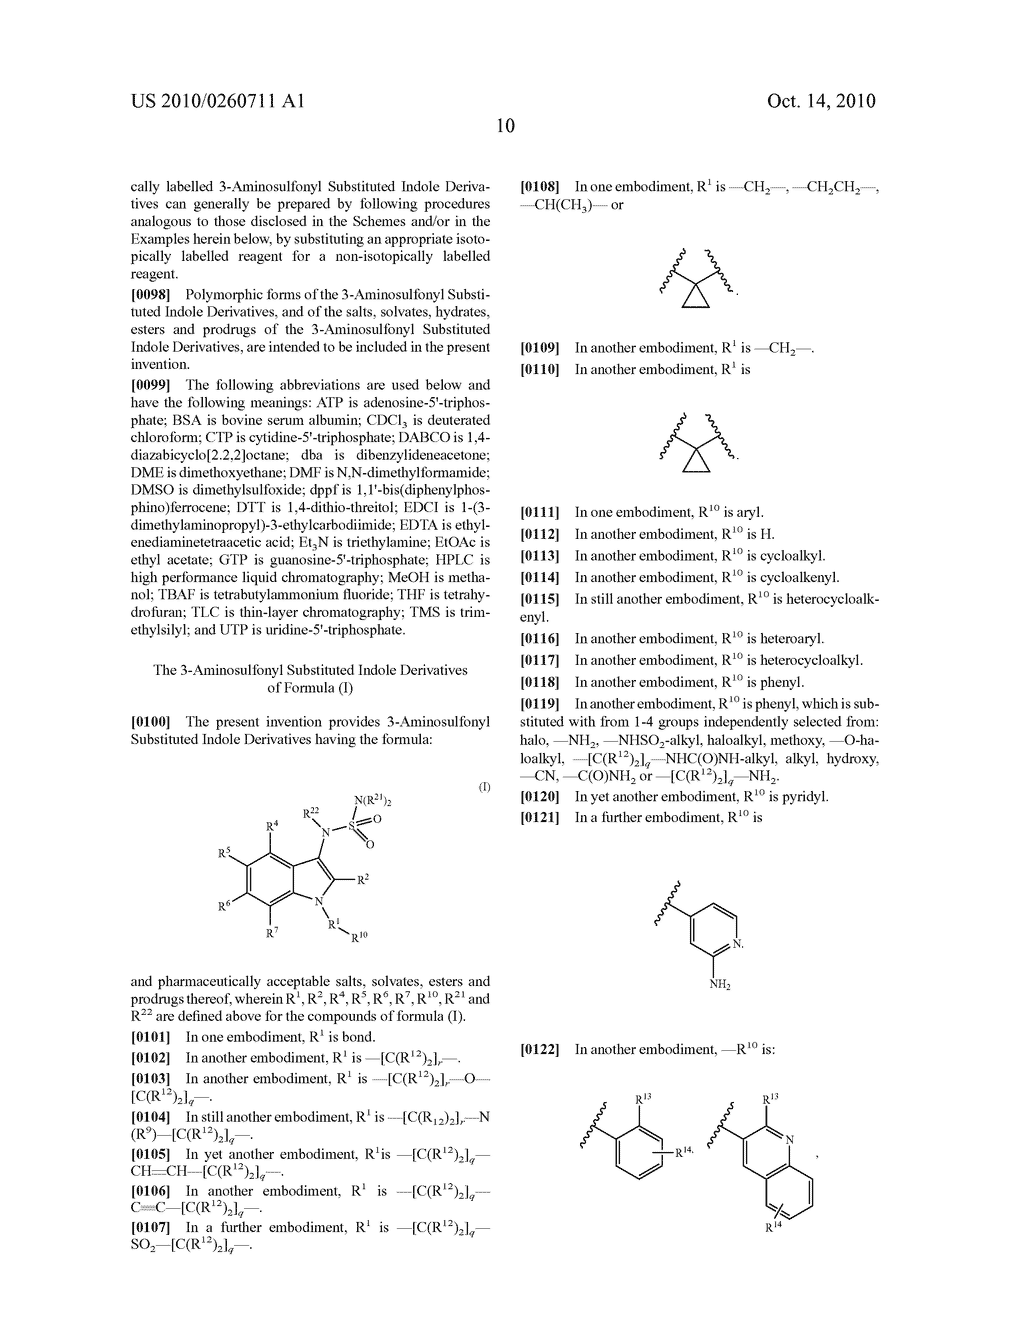 3-AMINOSULFONYL SUBSTITUTED INDOLE DERIVATIVES AND METHODS OF USE THEREOF - diagram, schematic, and image 11